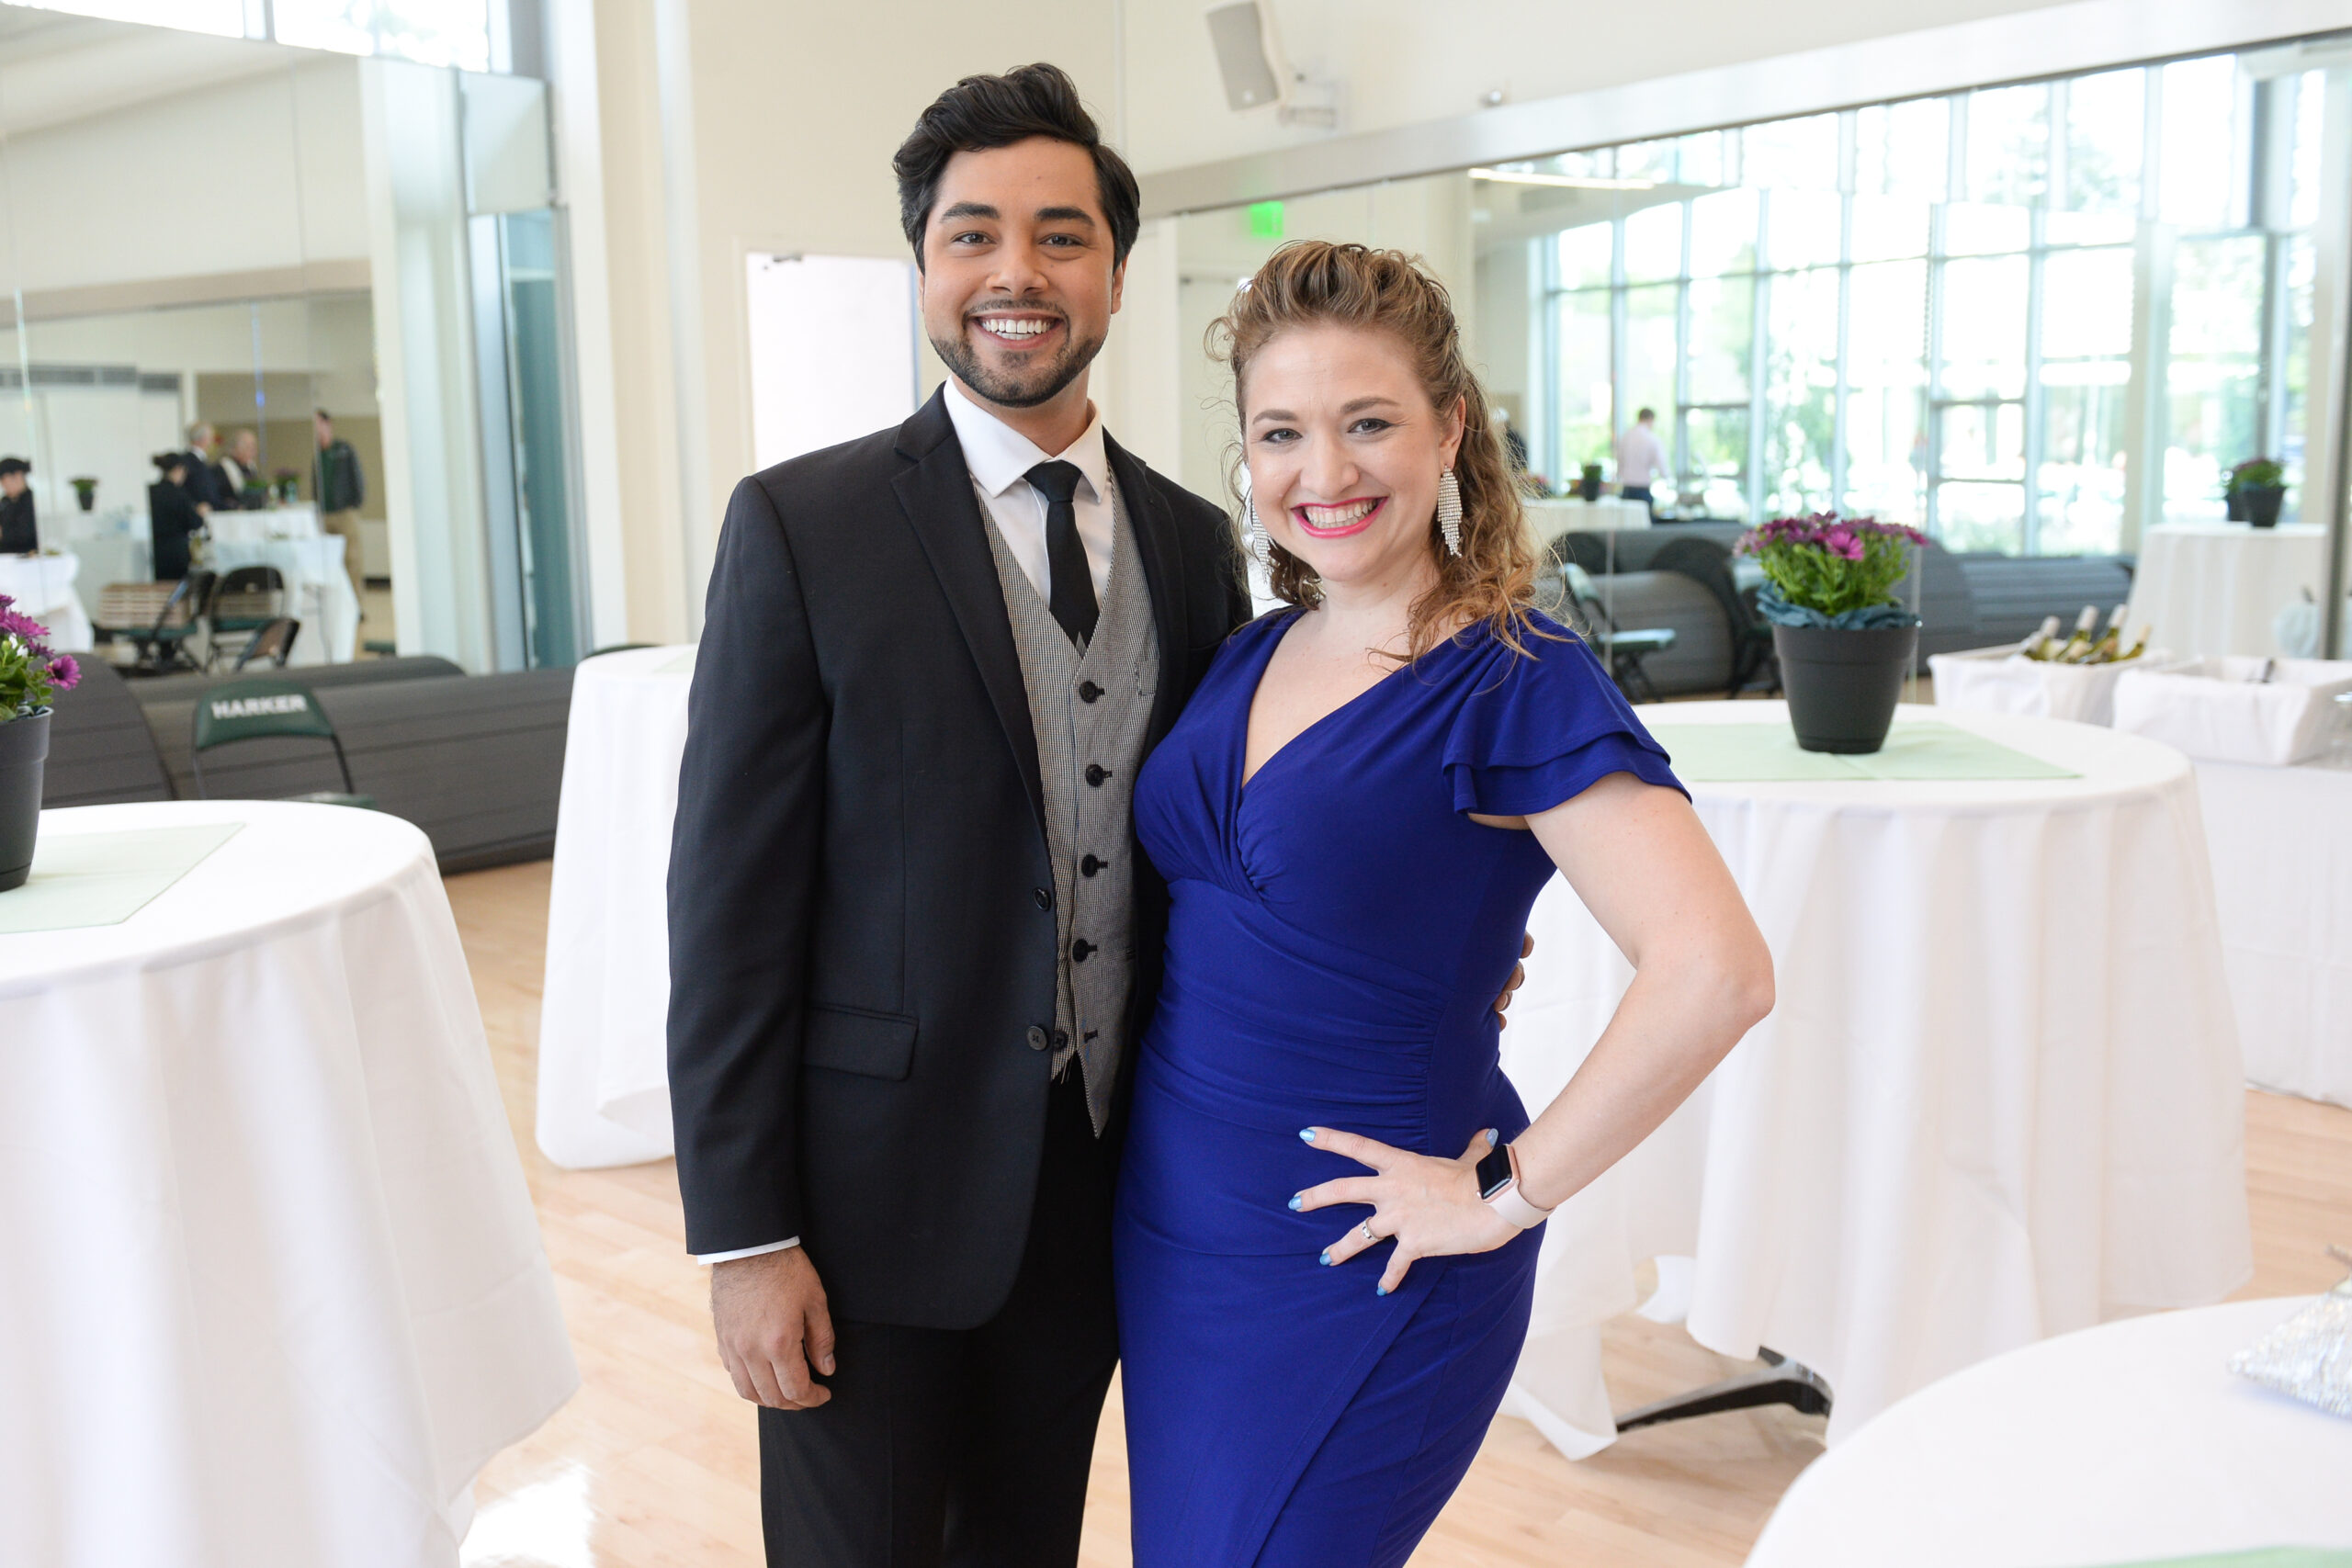 Inaugural Life in the Arts alumni awards presented to professional actor and operatic singer